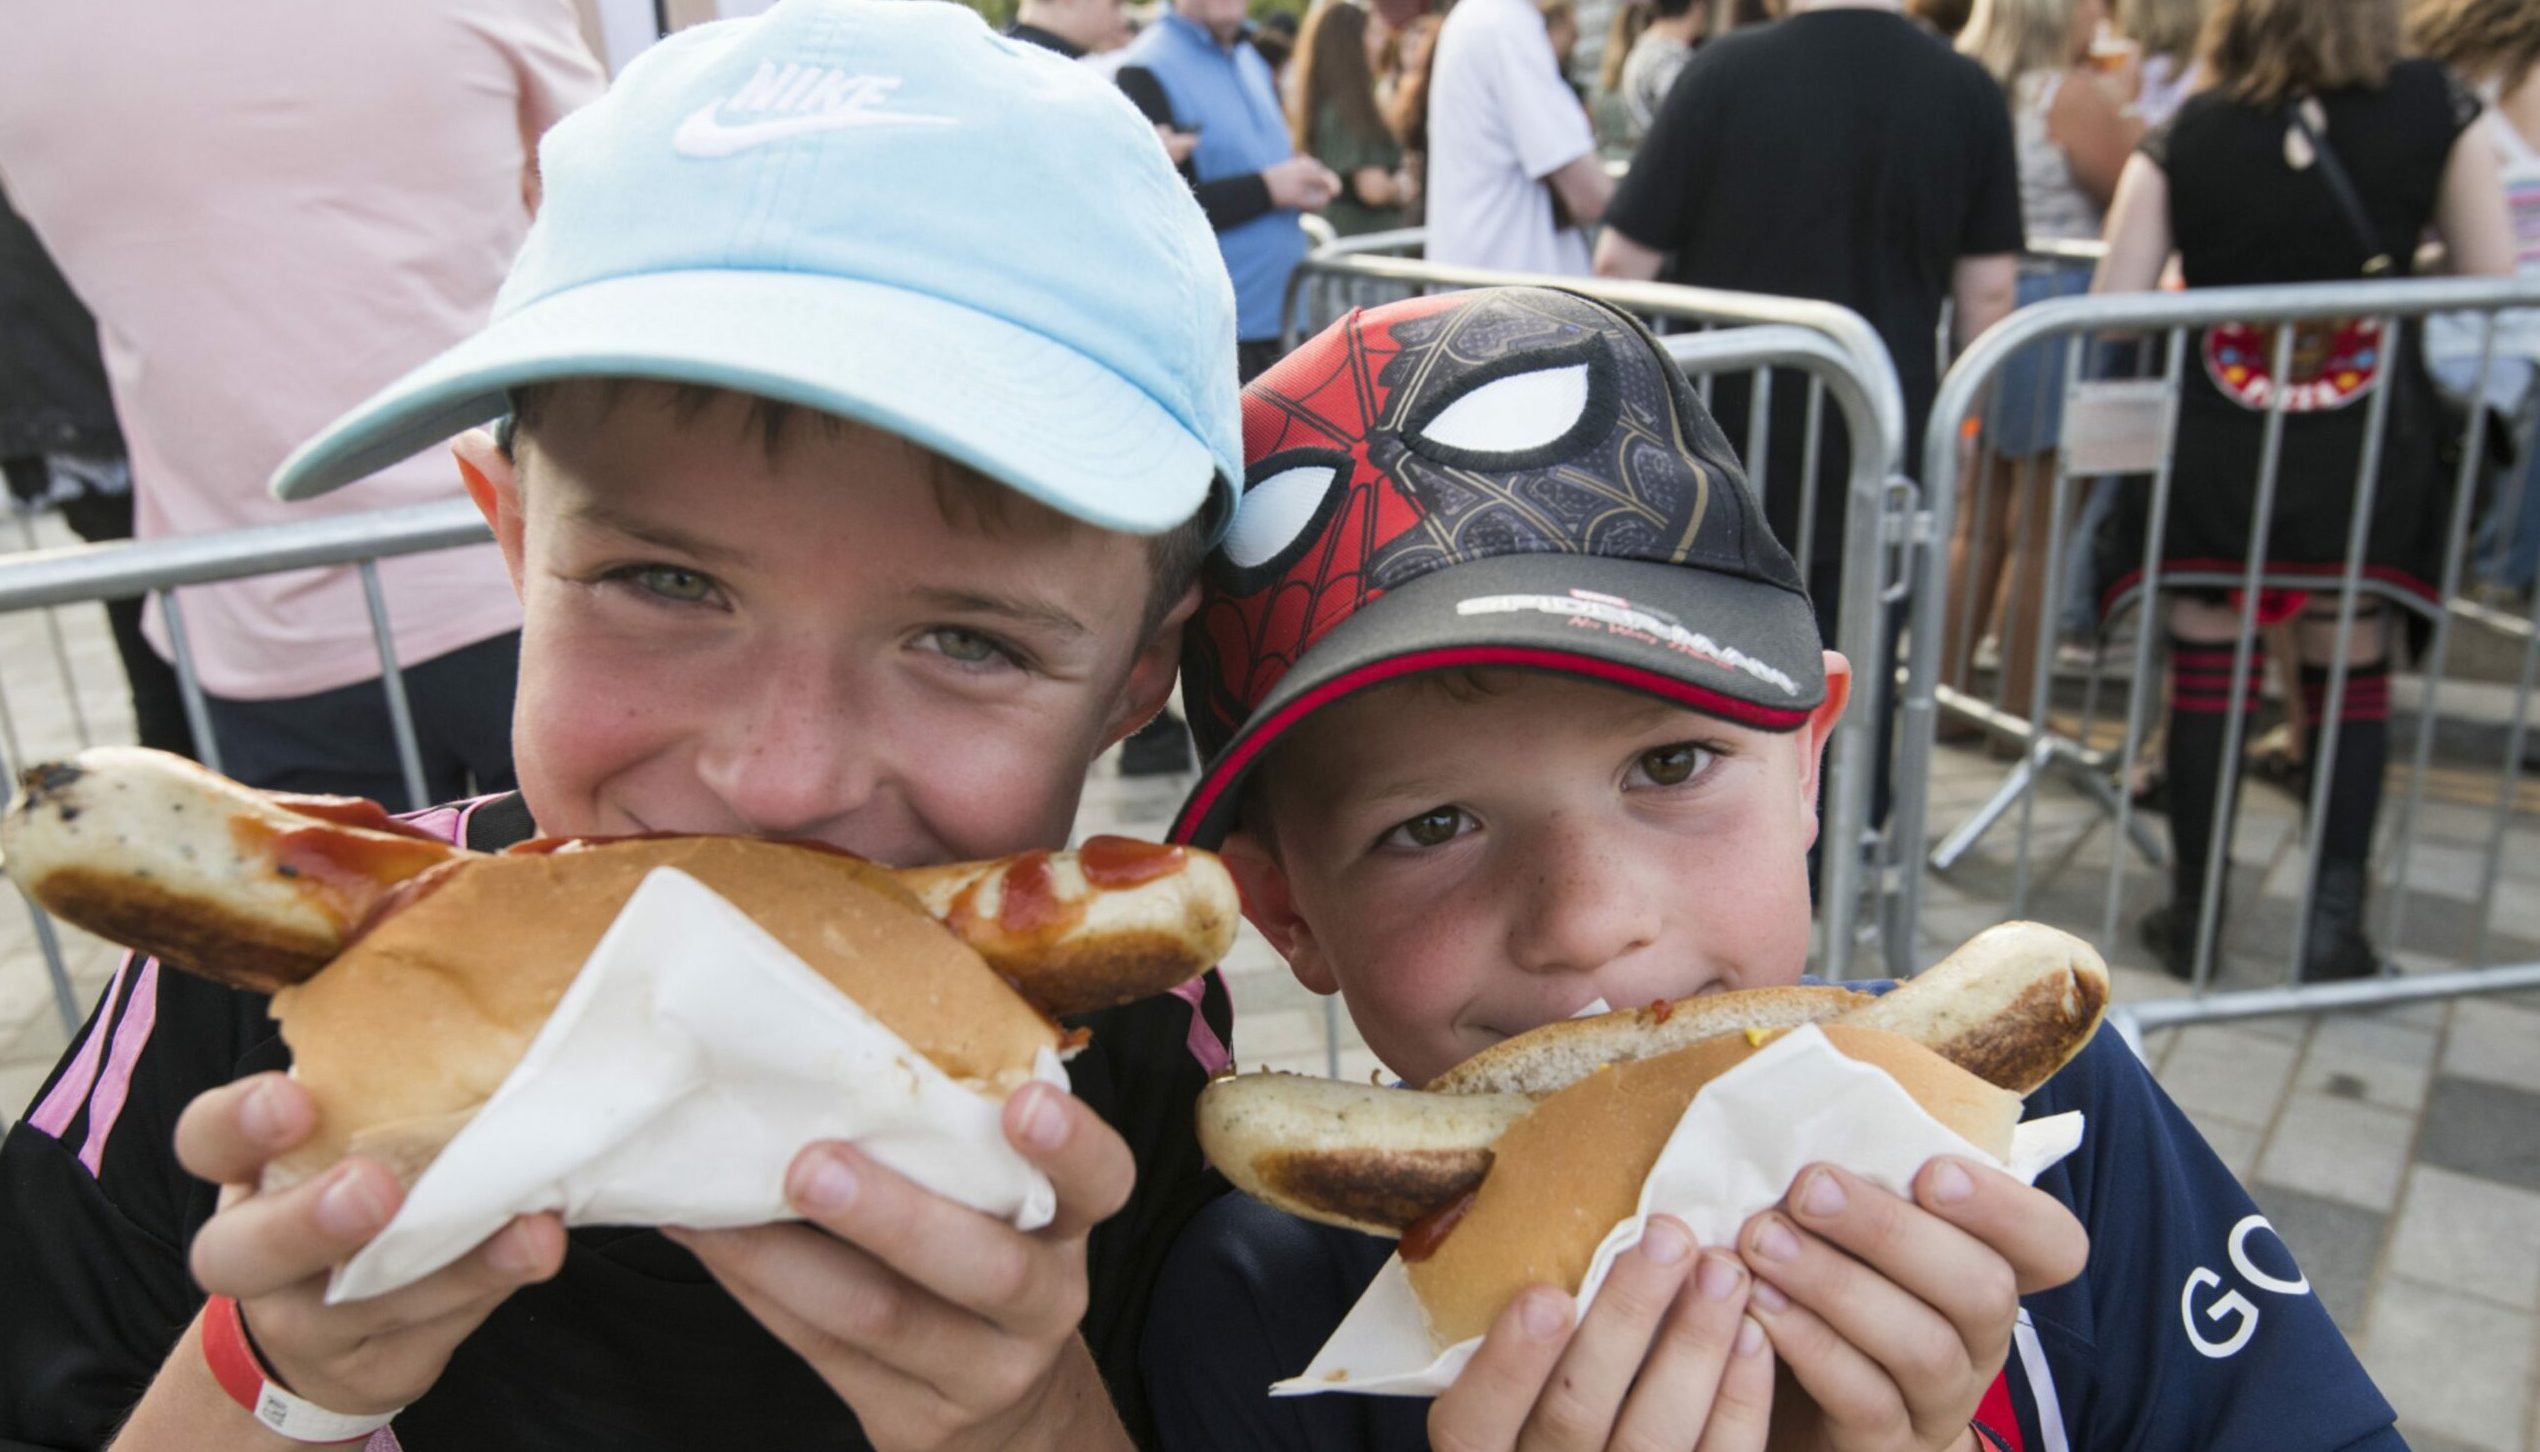 Hot Dog smiles from two youngsters at the Sausage and Cider Festival took place on Friday Night at Dundee's Slessor Gardens.